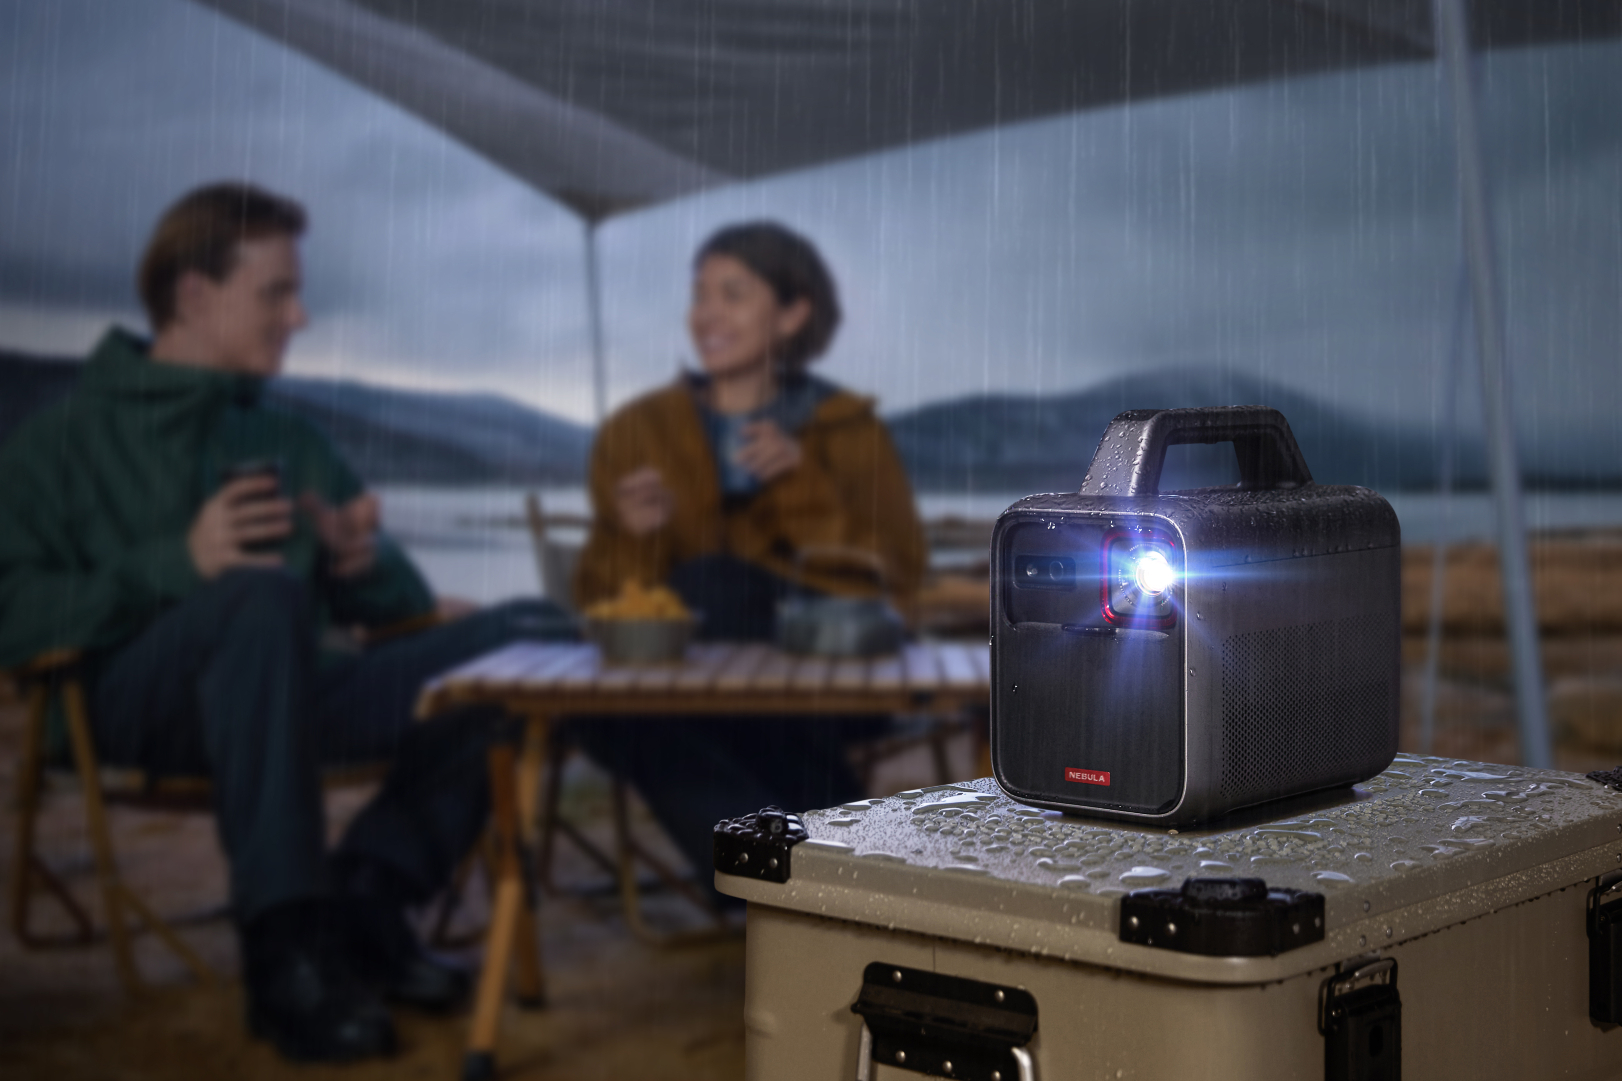 Anker's Nebula Mars 3 projector is bright and outdoor ready | Digital